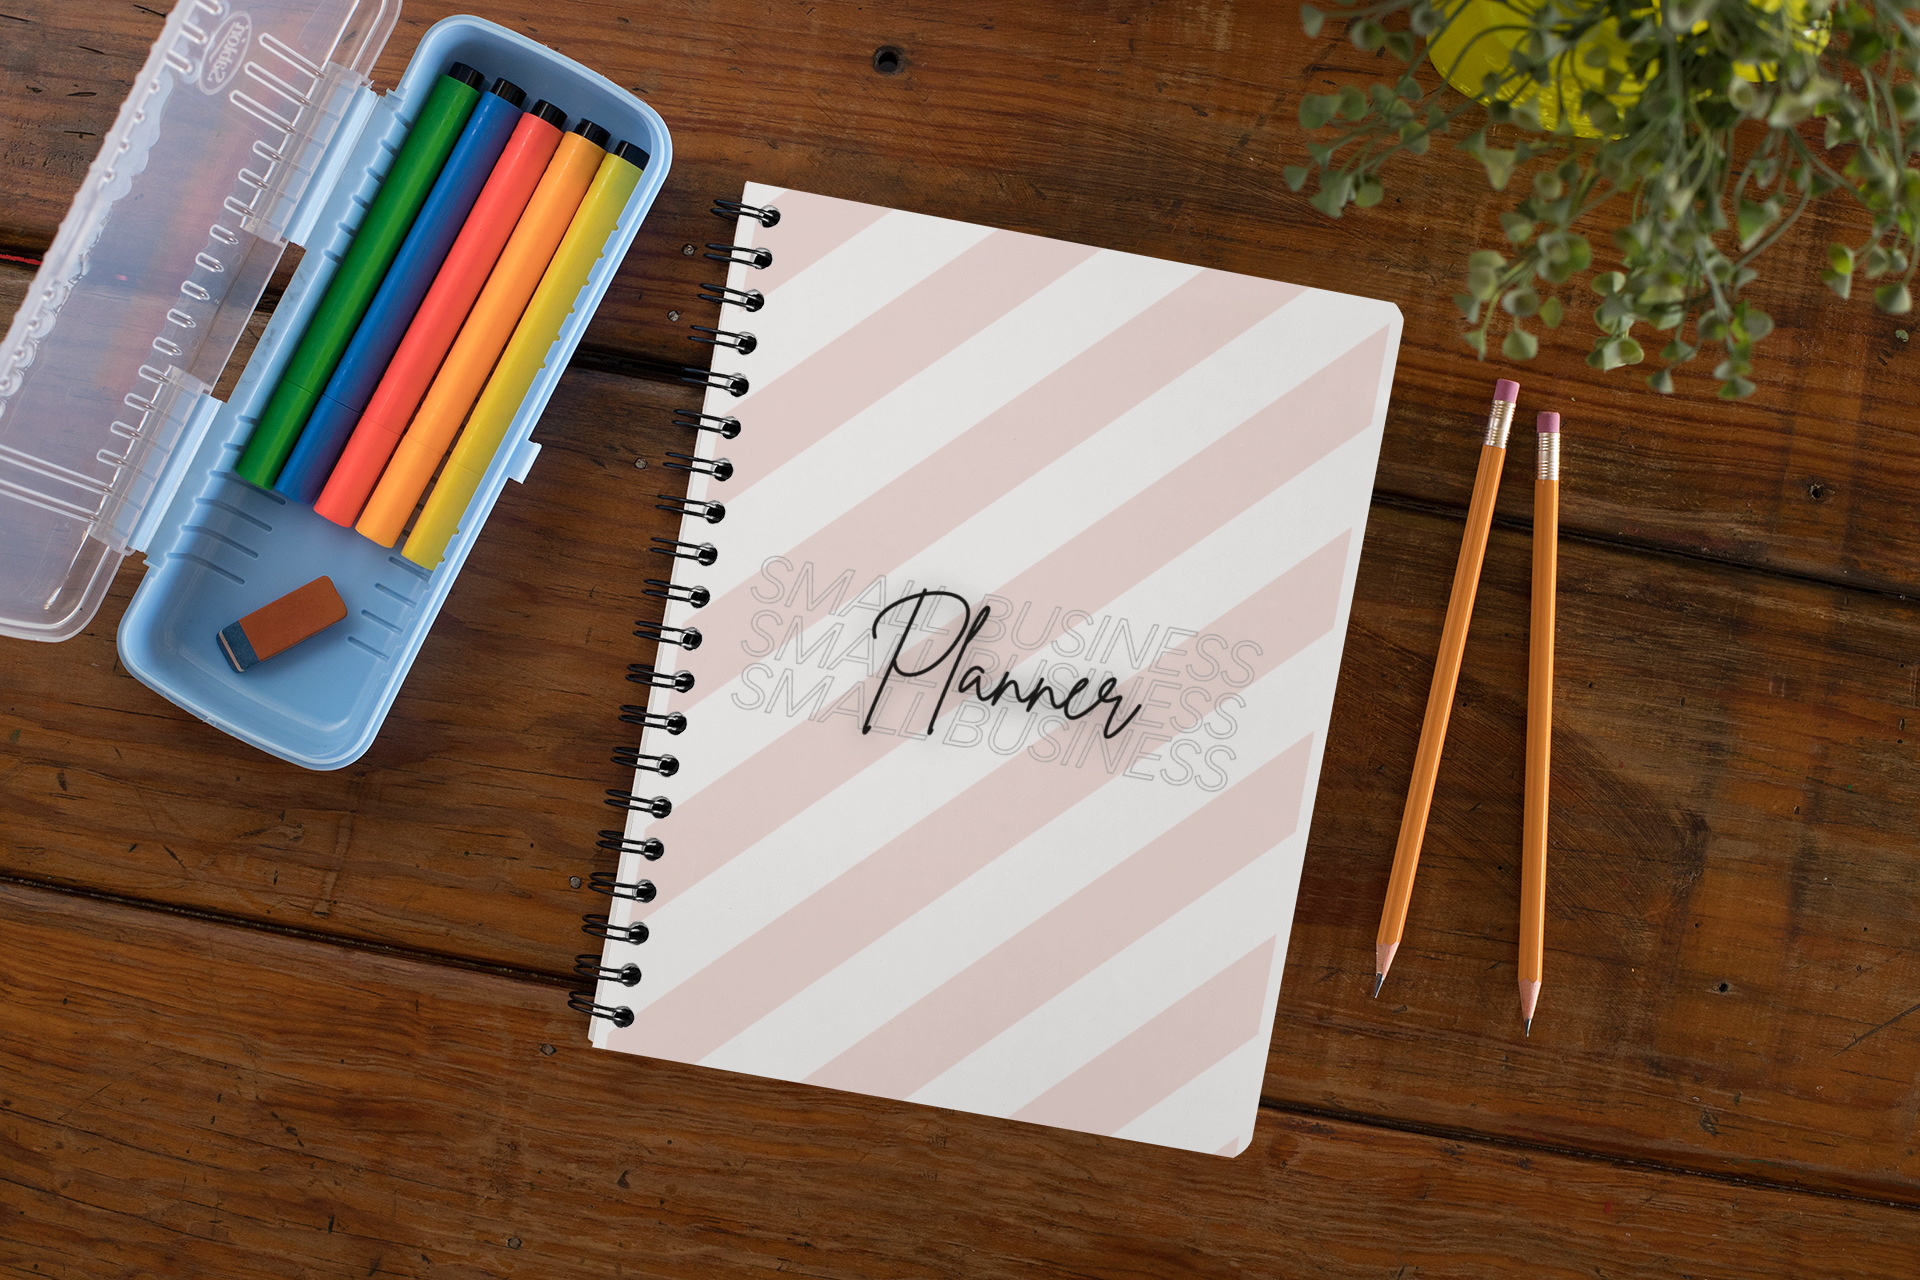 mockup-of-a-spiral-notebook-over-a-wooden-surface-29960